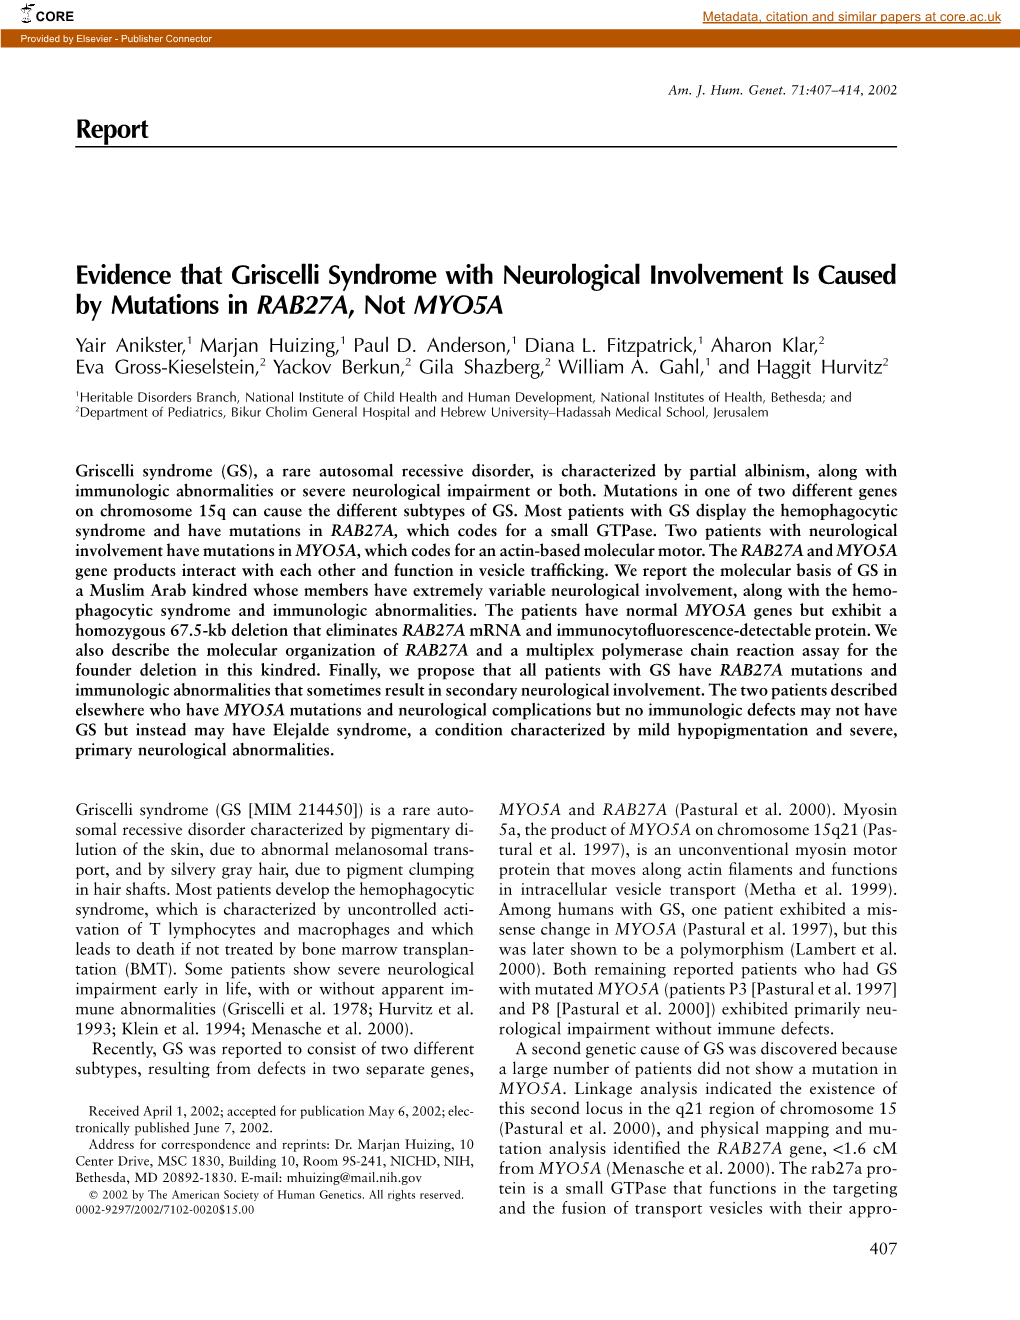 Report Evidence That Griscelli Syndrome with Neurological